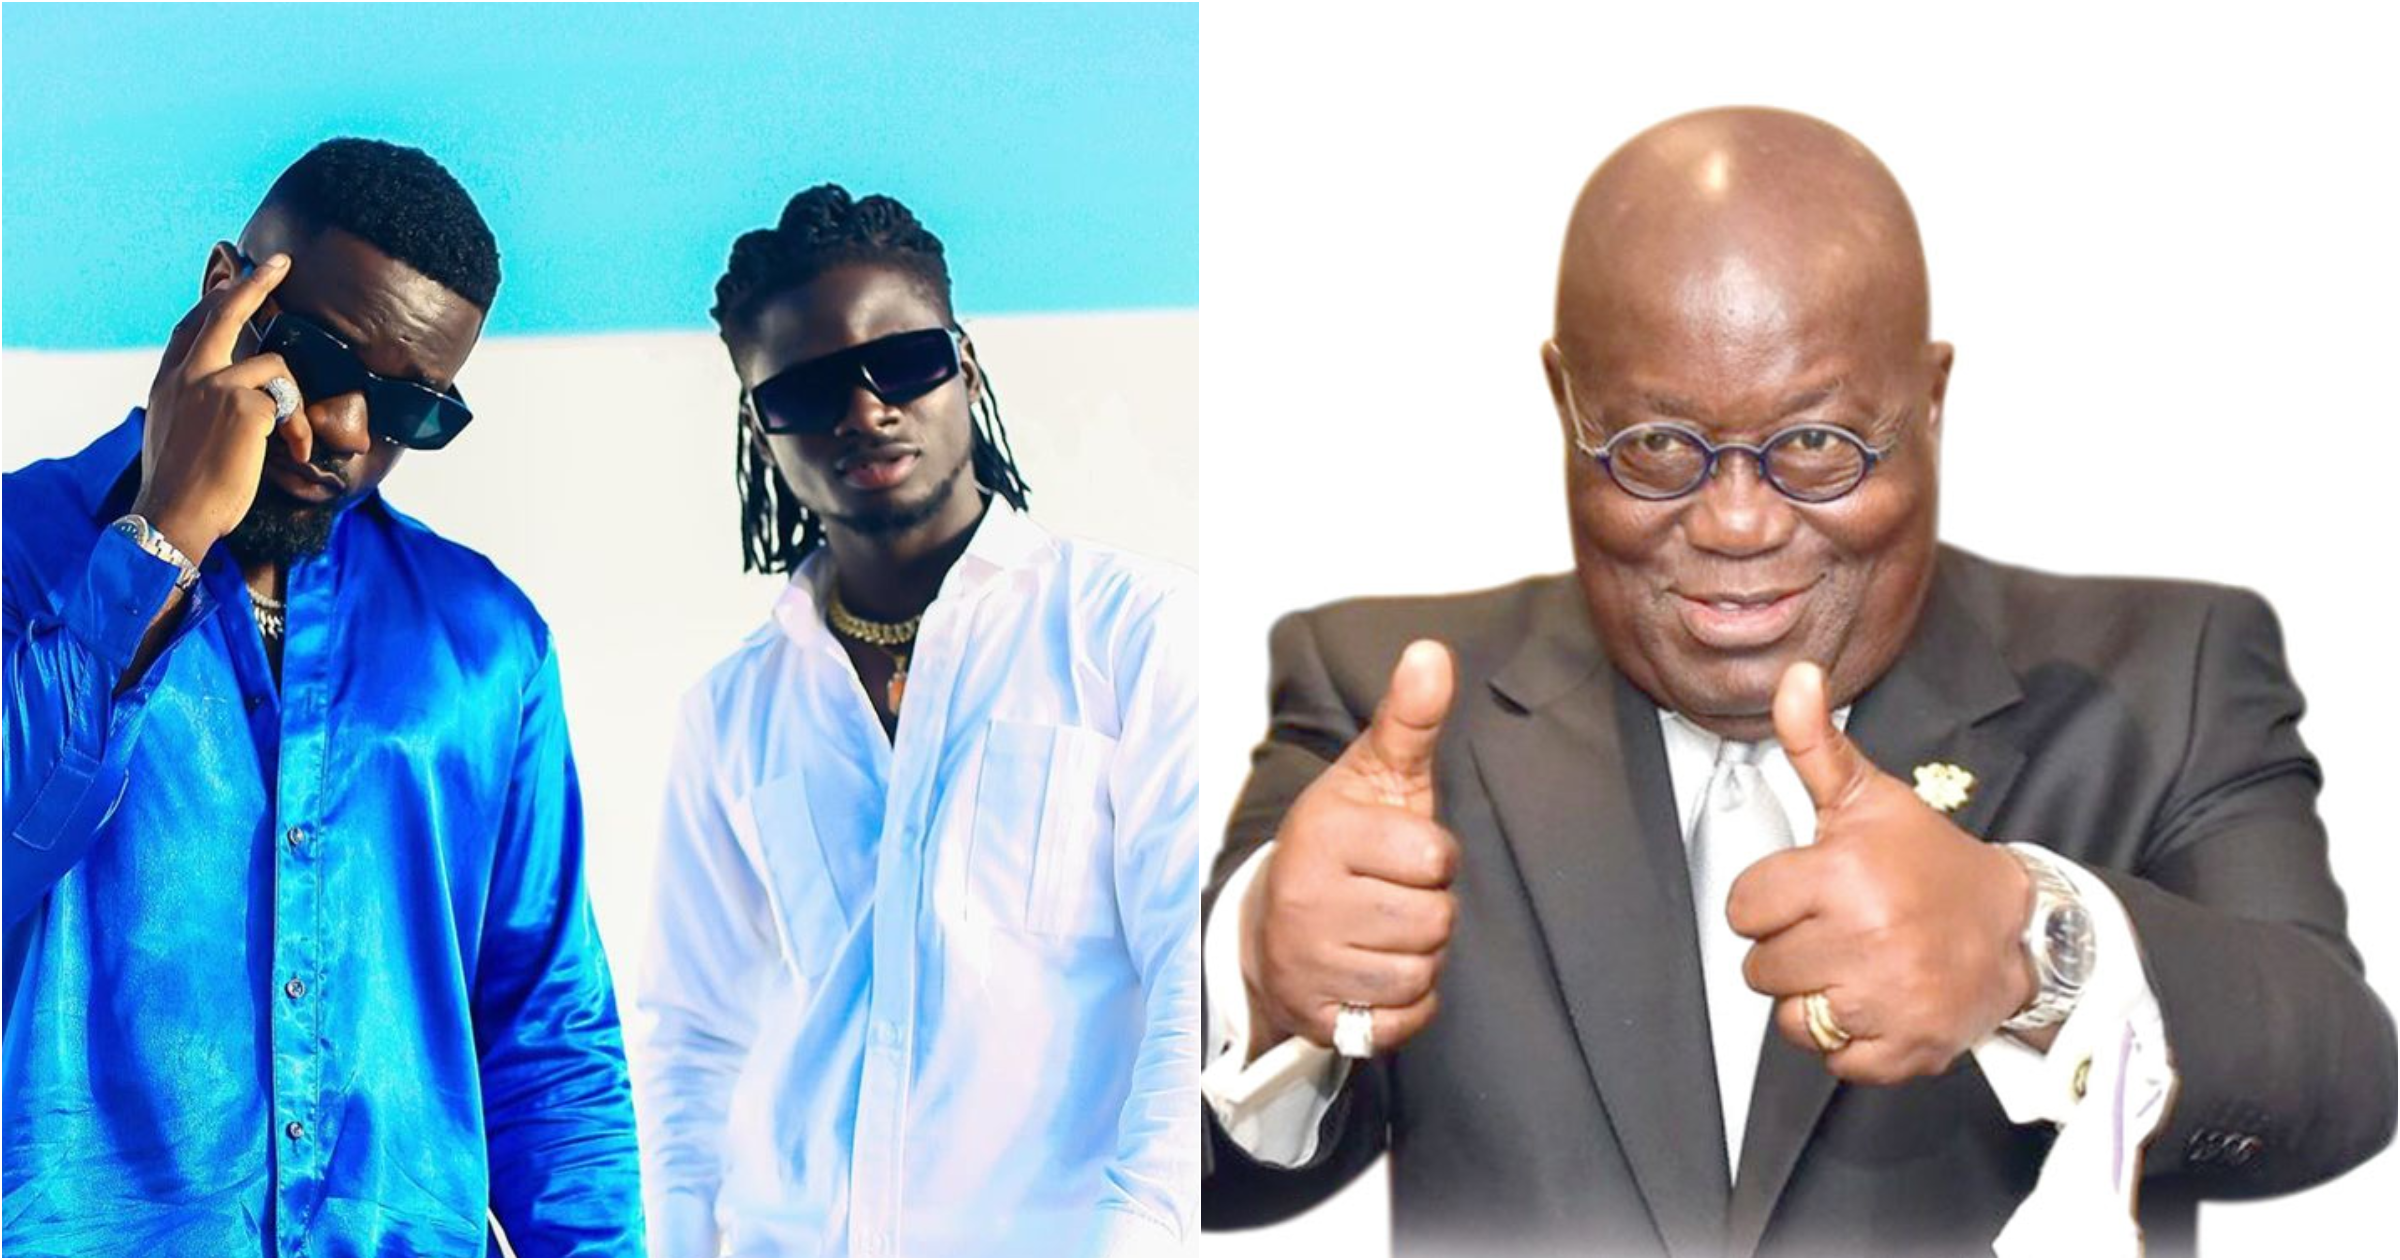 Sarkodie endorses Akufo-Addo in new song Happy Day featuring Kuami Eugene